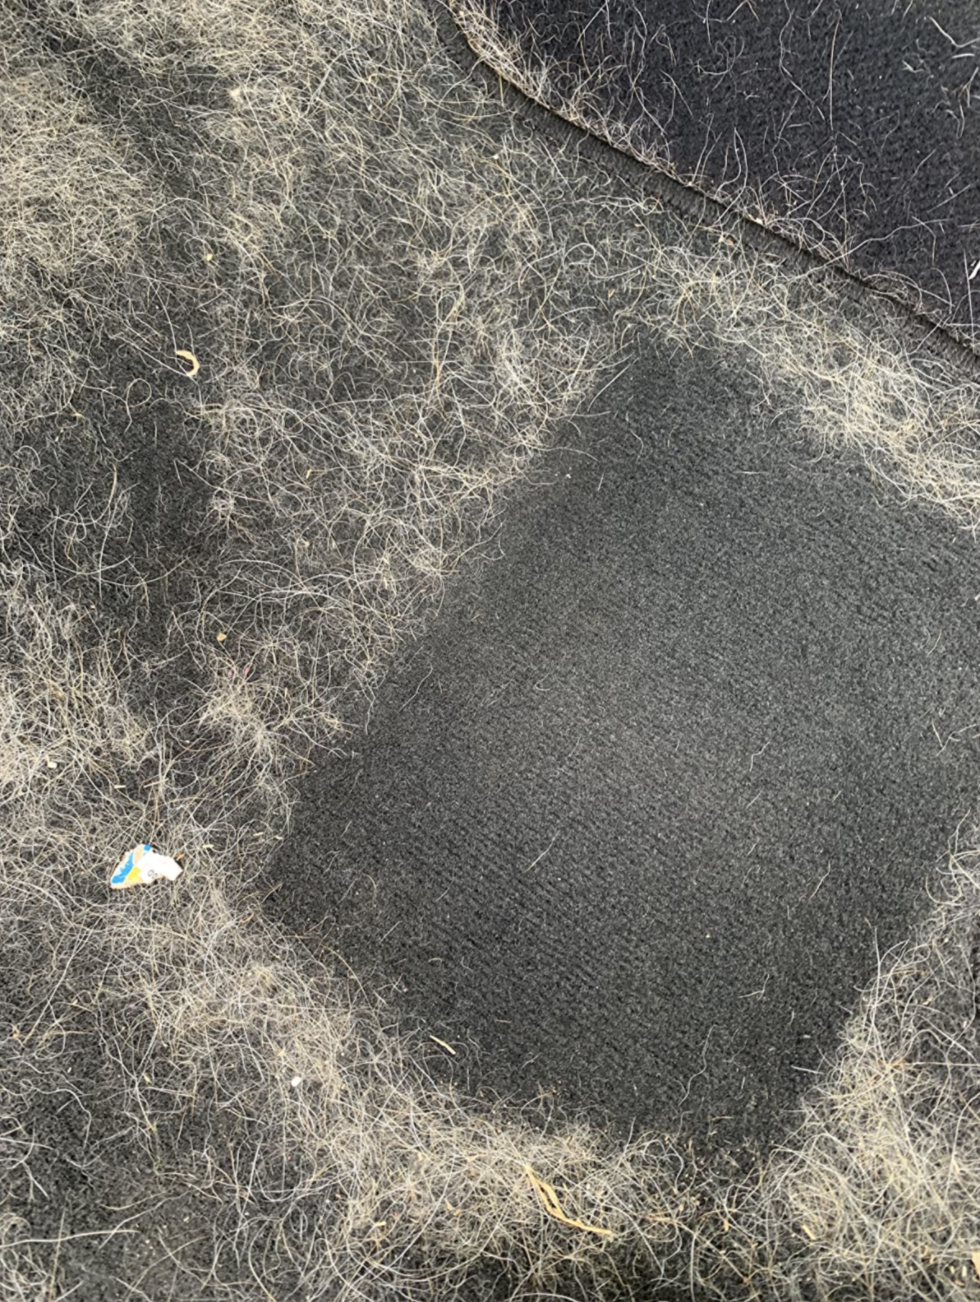 A customer review photo of their car mat covered in dog hair except for one area where they used the roller